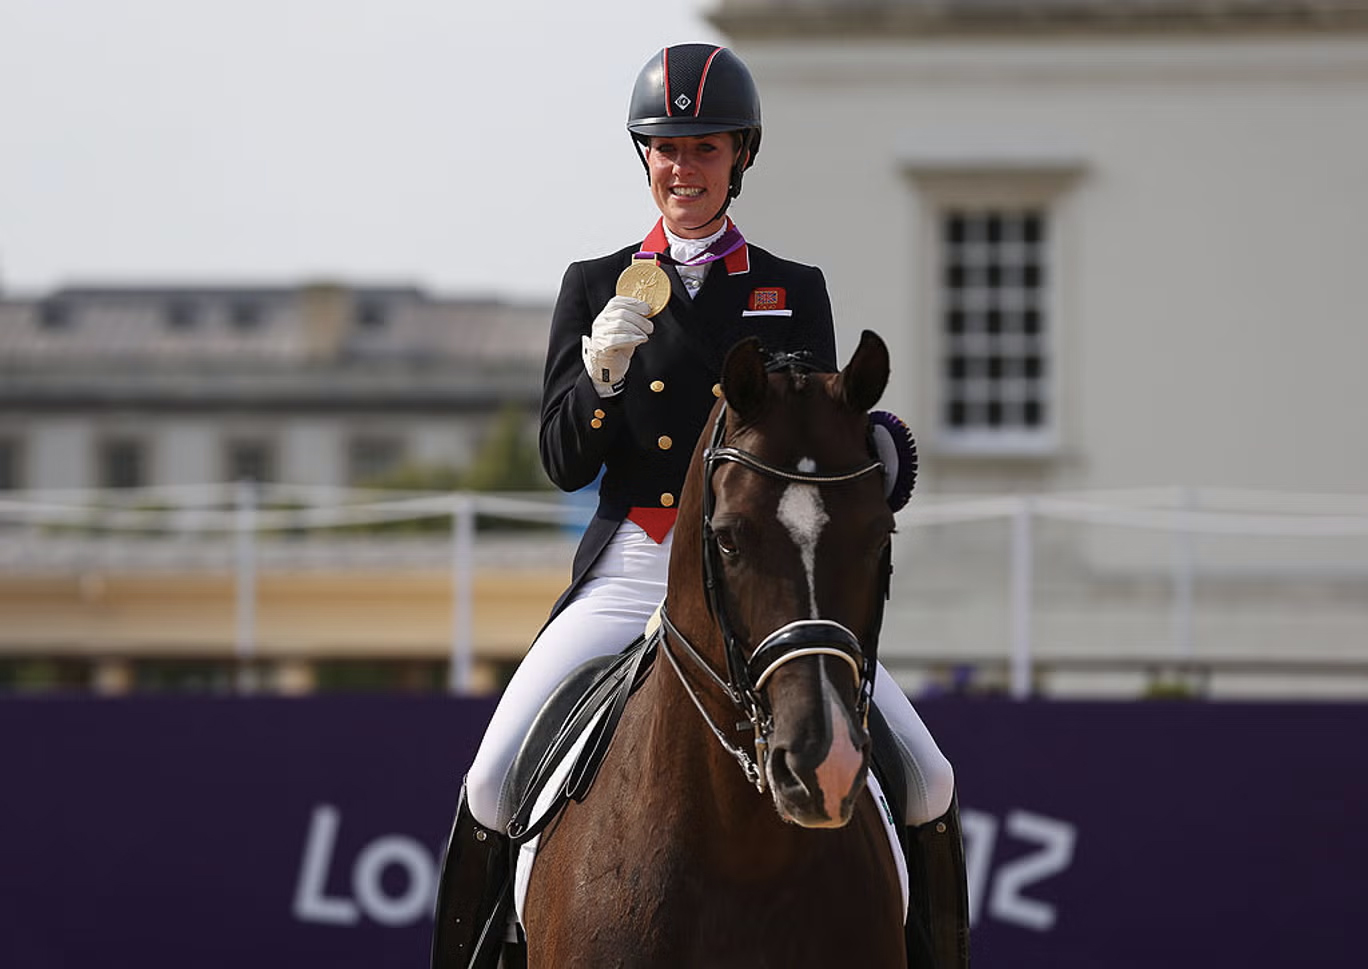 Charlotte Dujardin withdraws from Olympics due to FEI Investigation: Video Released